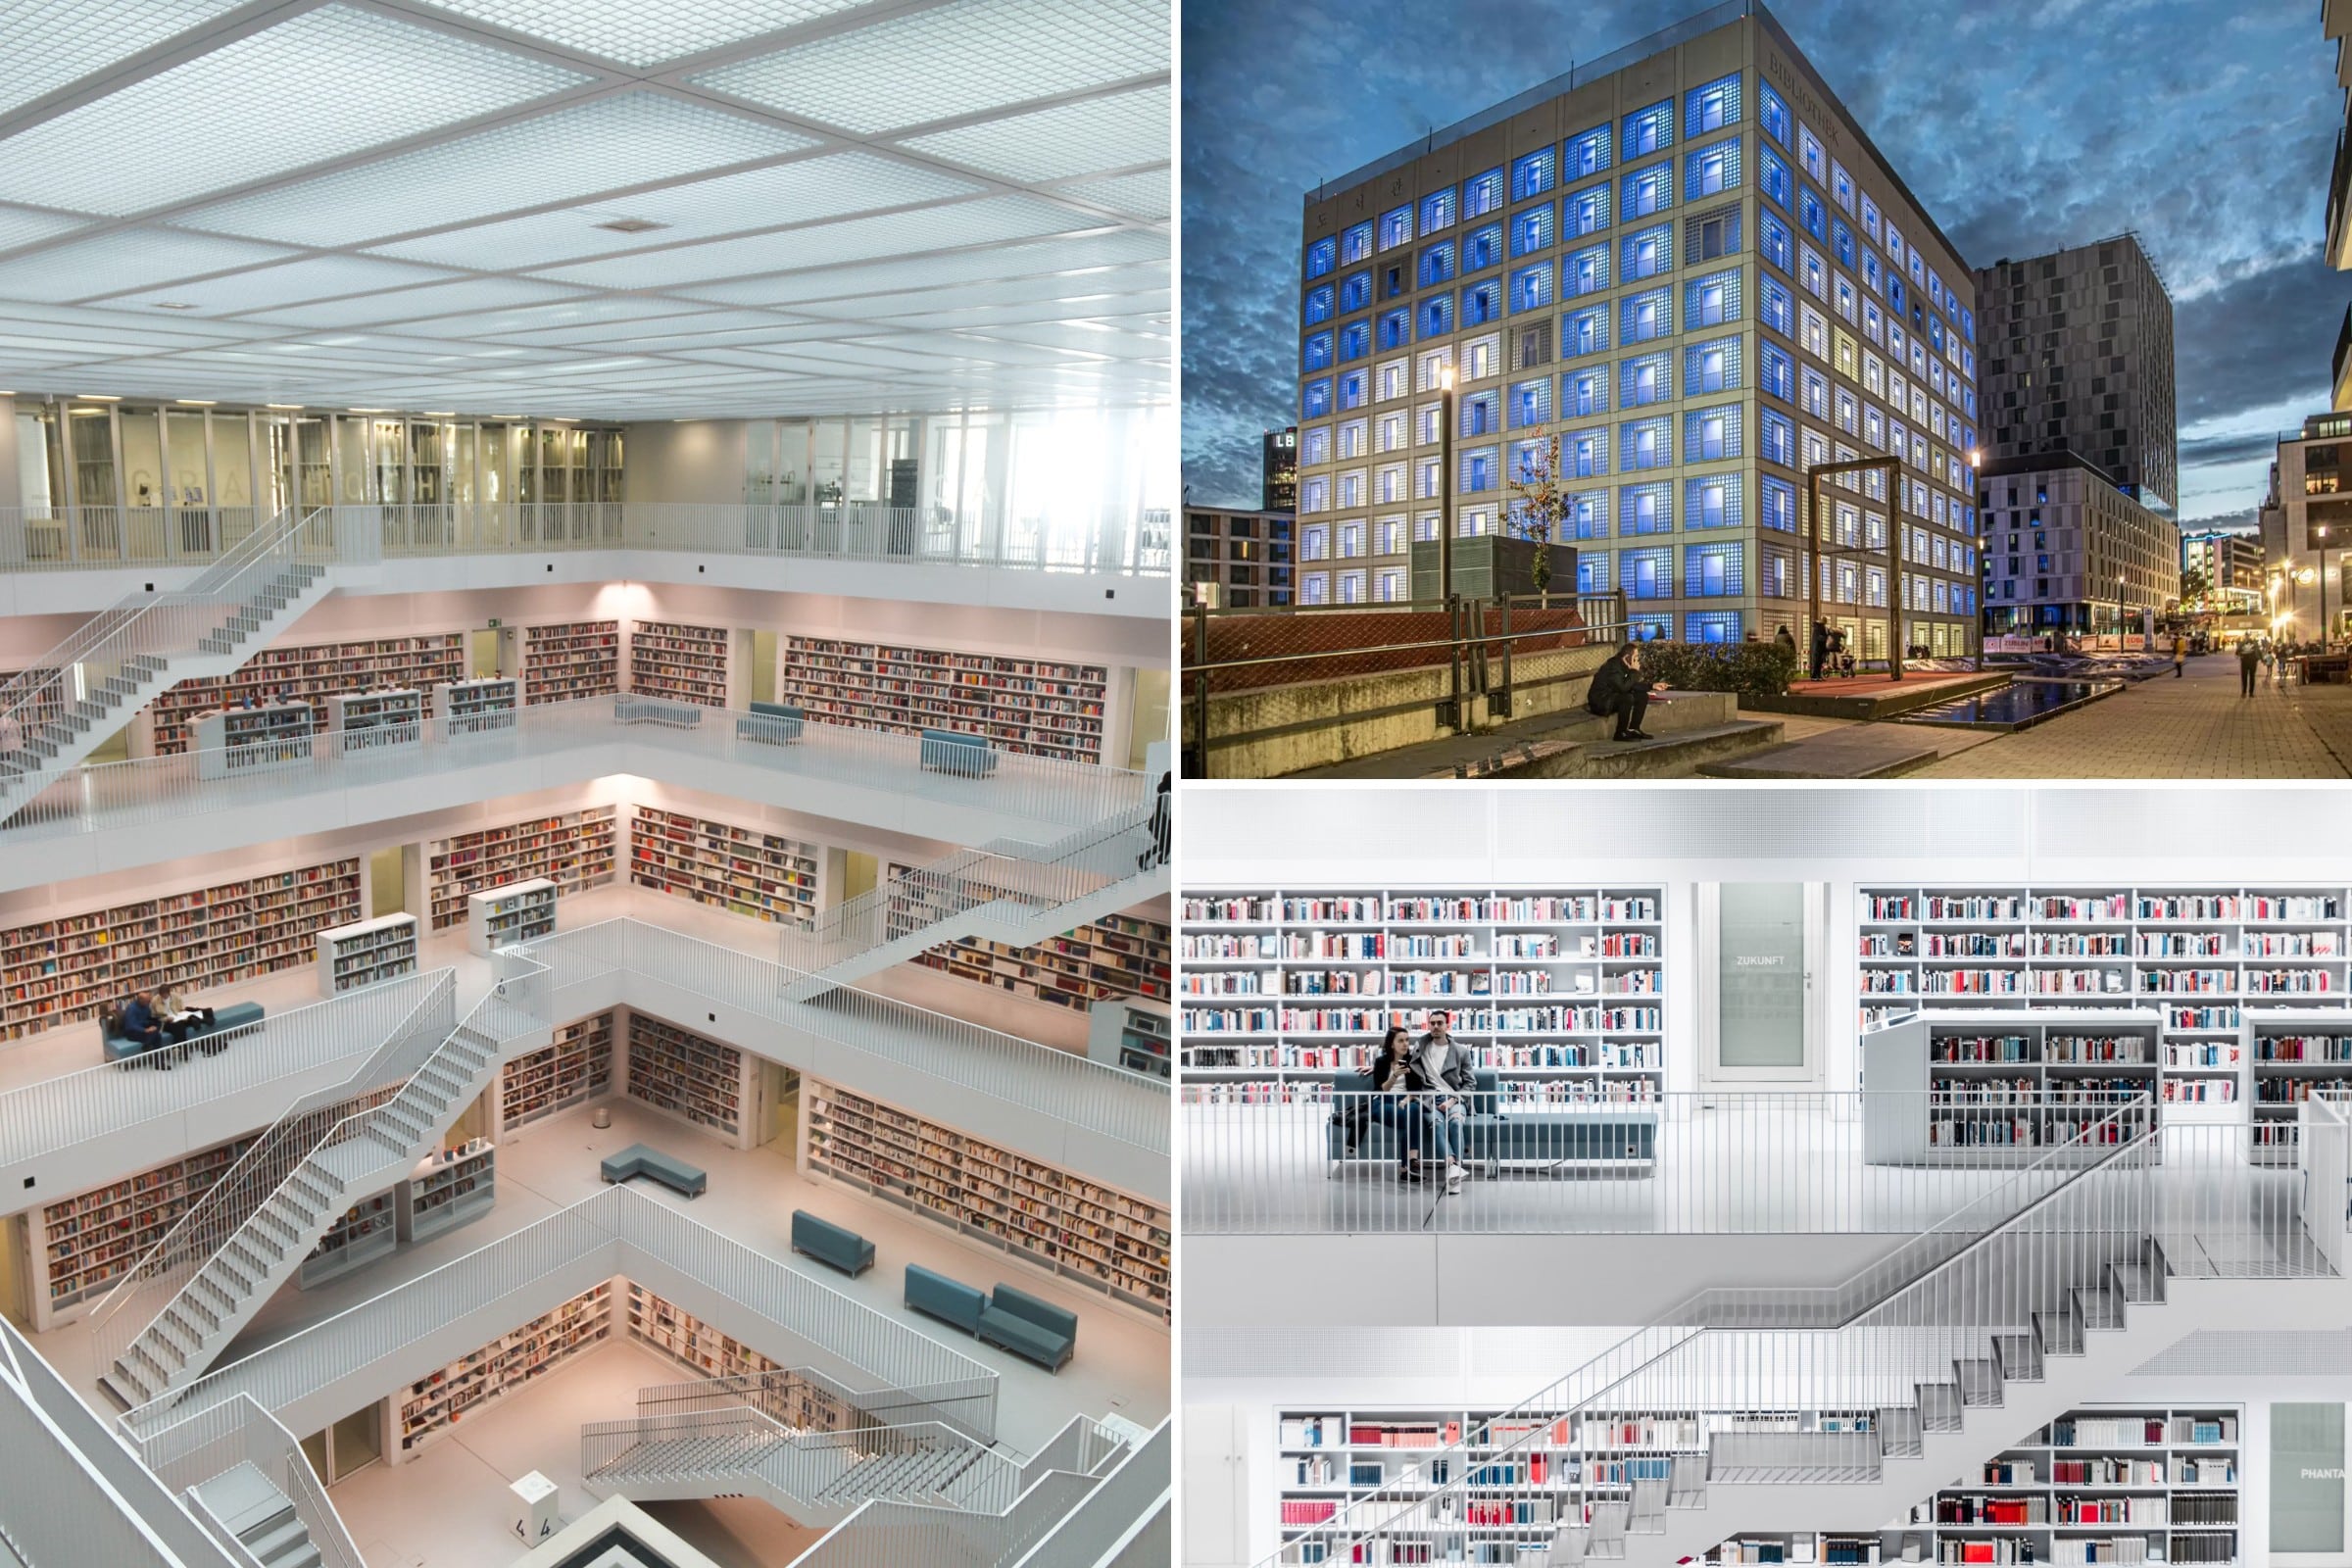 Inside 9 Most Beautiful Libraries In The World - Stuttgart City Library